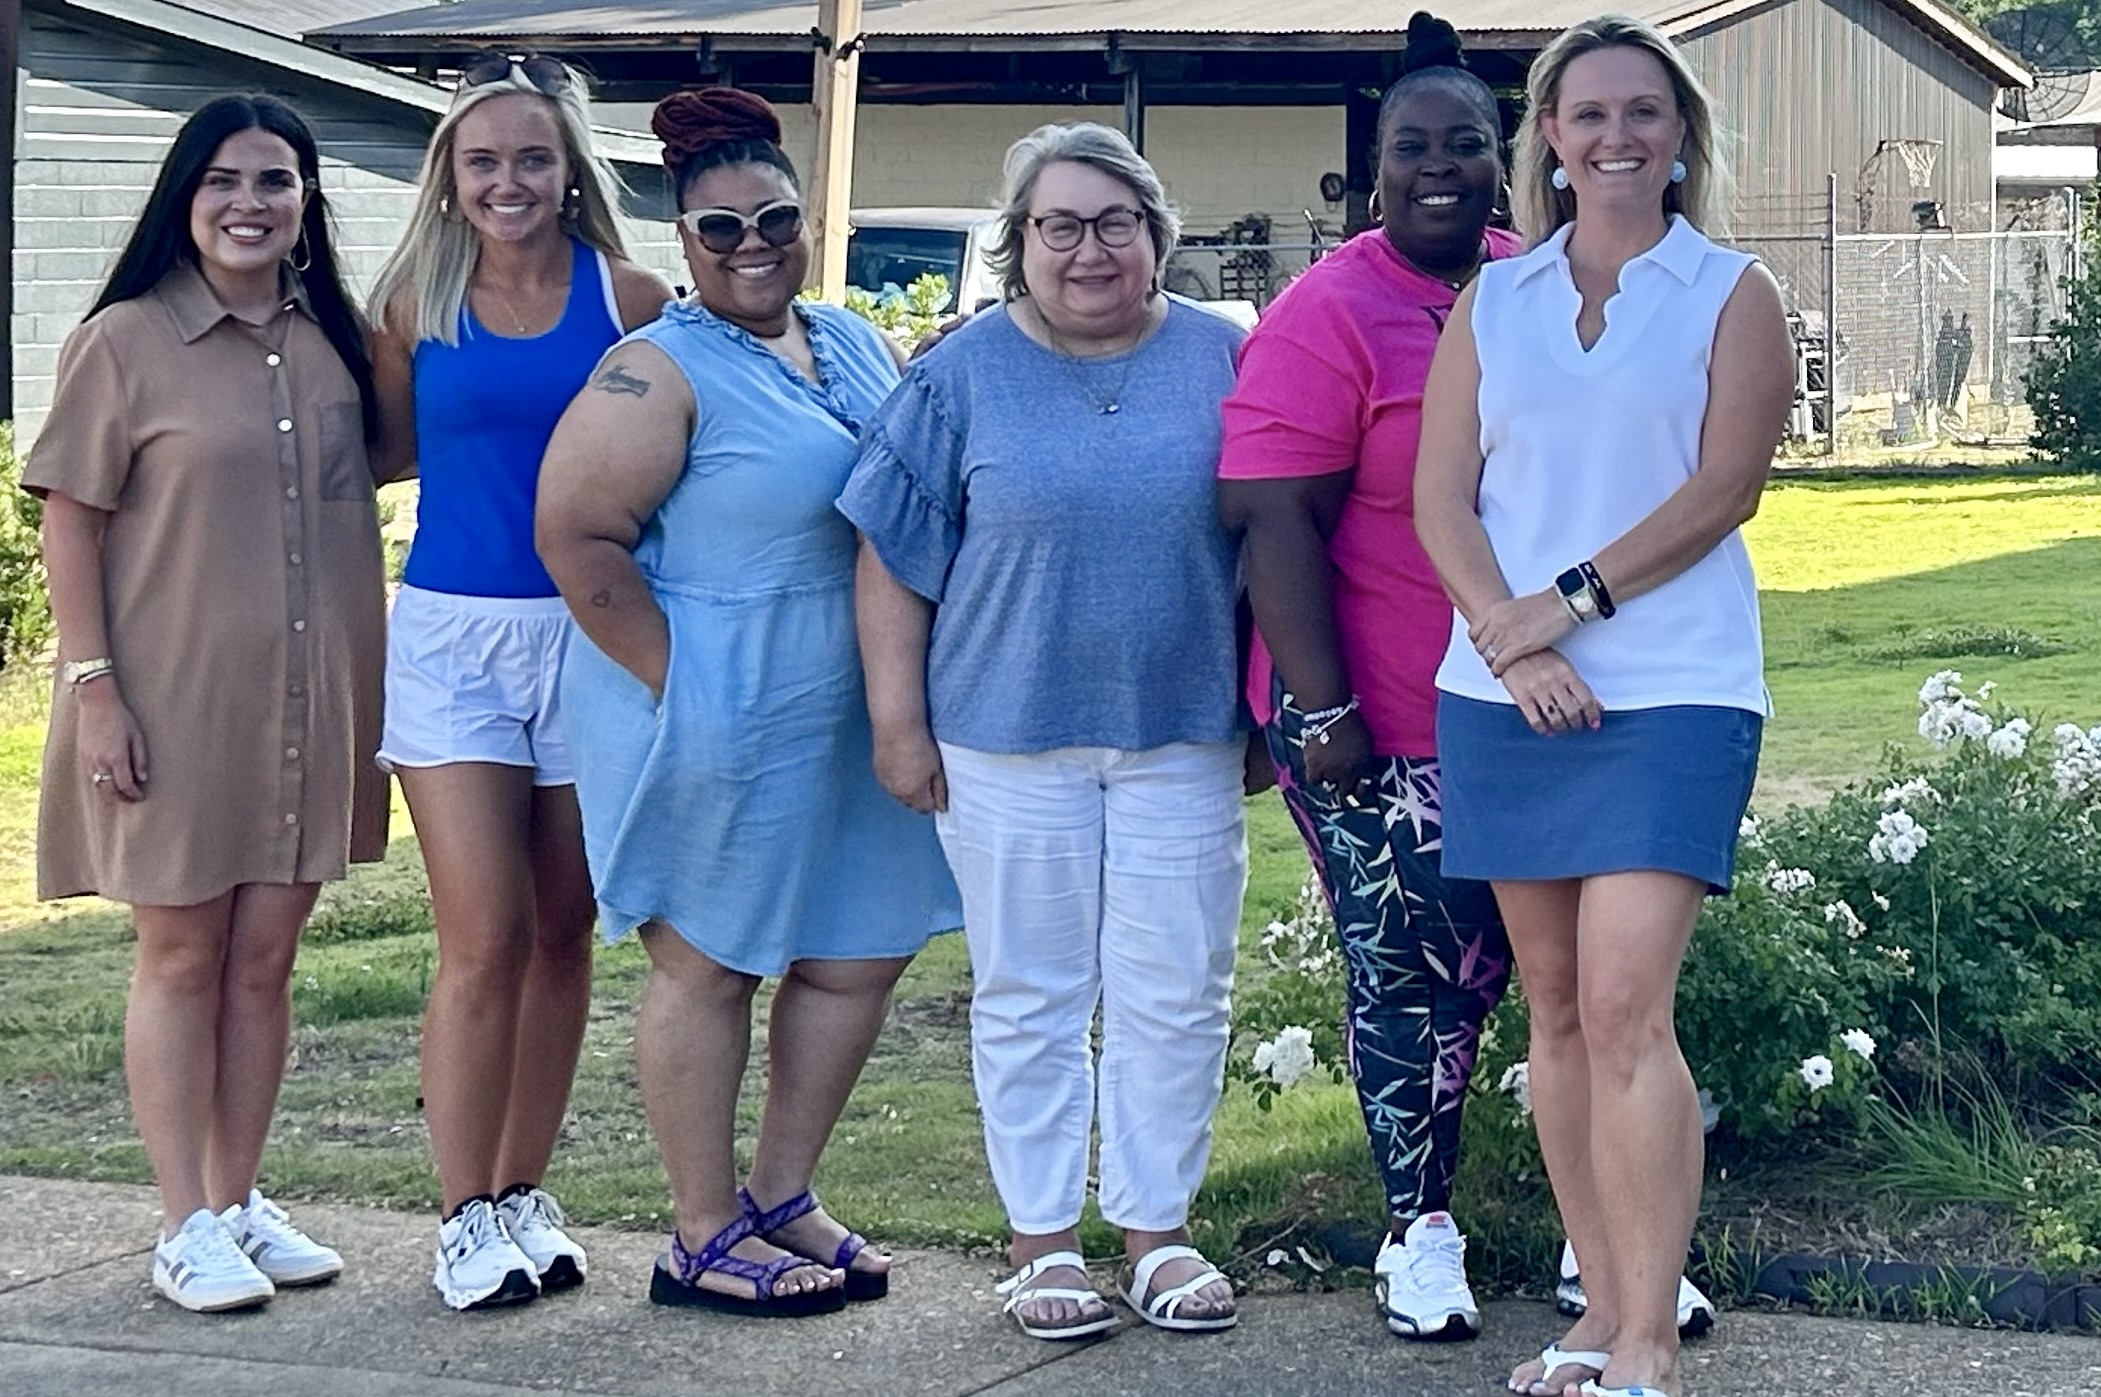 The Wilcox Area Chamber of Commerce committee working at the event included, from left to right, Mary Katherine Pittman, Molly Allen, Samantha Gomez, Mary Lois Woodson, Kawanna Pledger and Ashely Kitzinger.